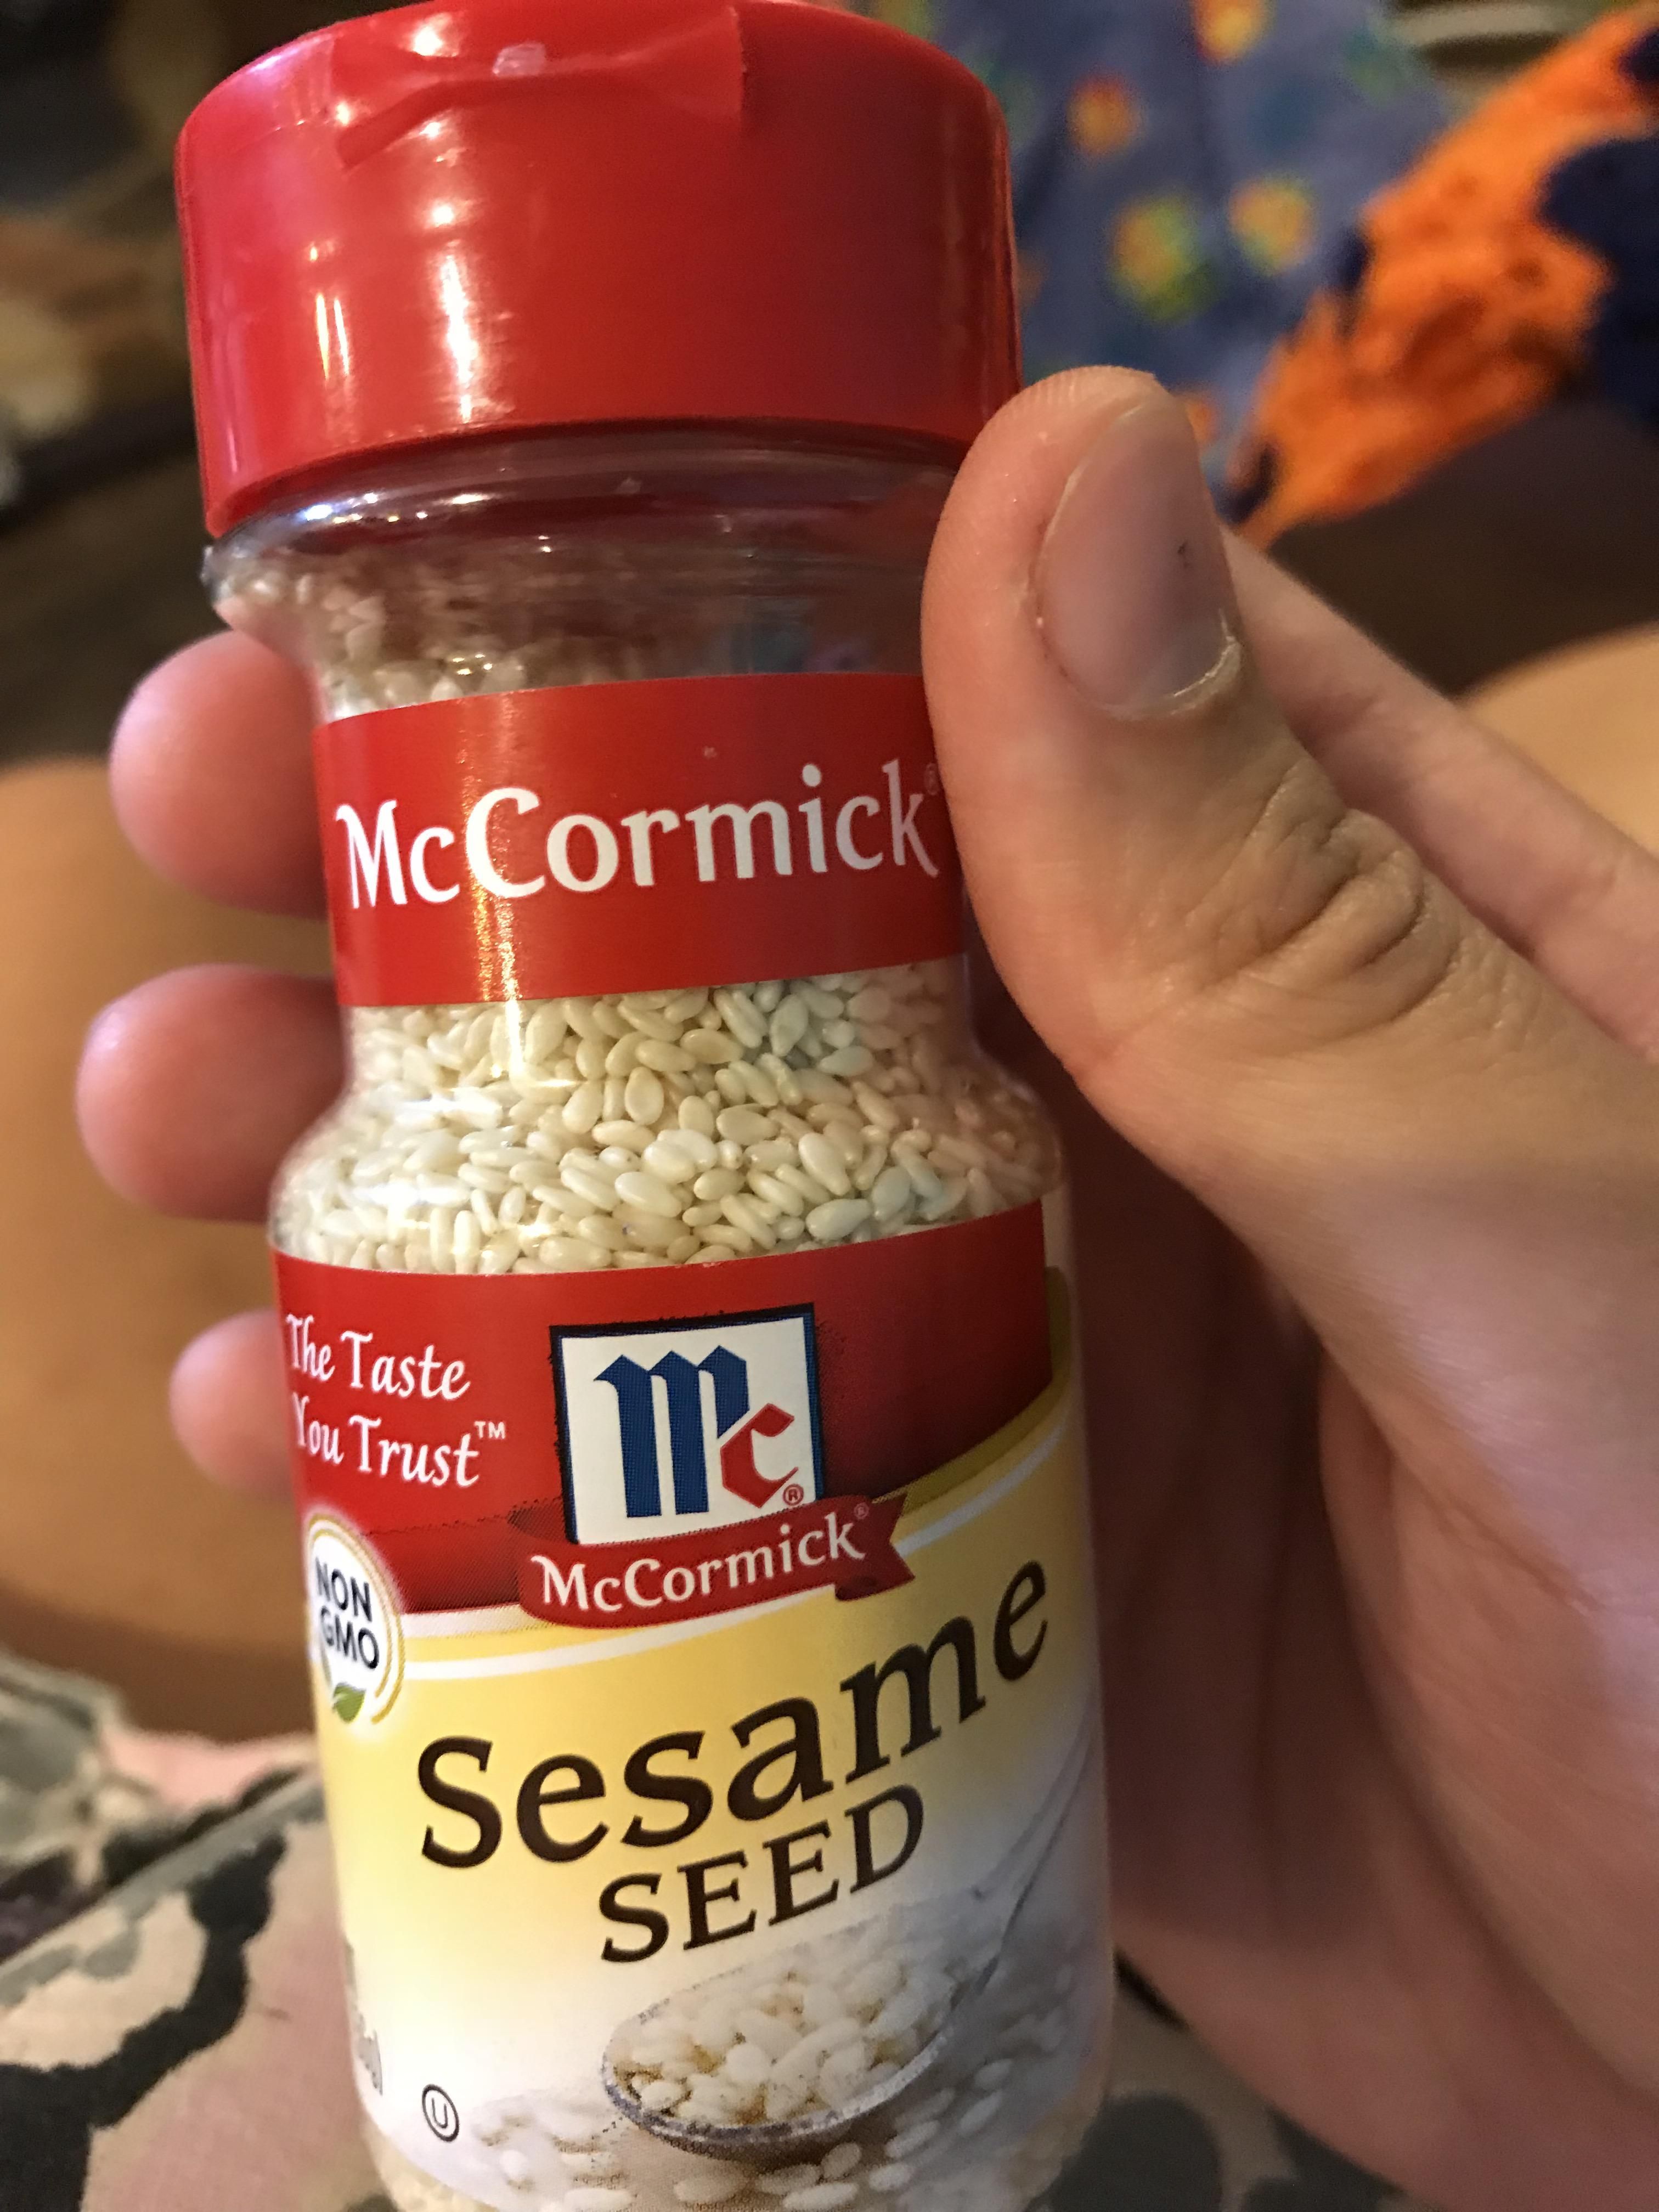 My sister couldn’t open a spice container, so she asked me for help. I looked at it and said “So... you need me to... Open Sesame?”